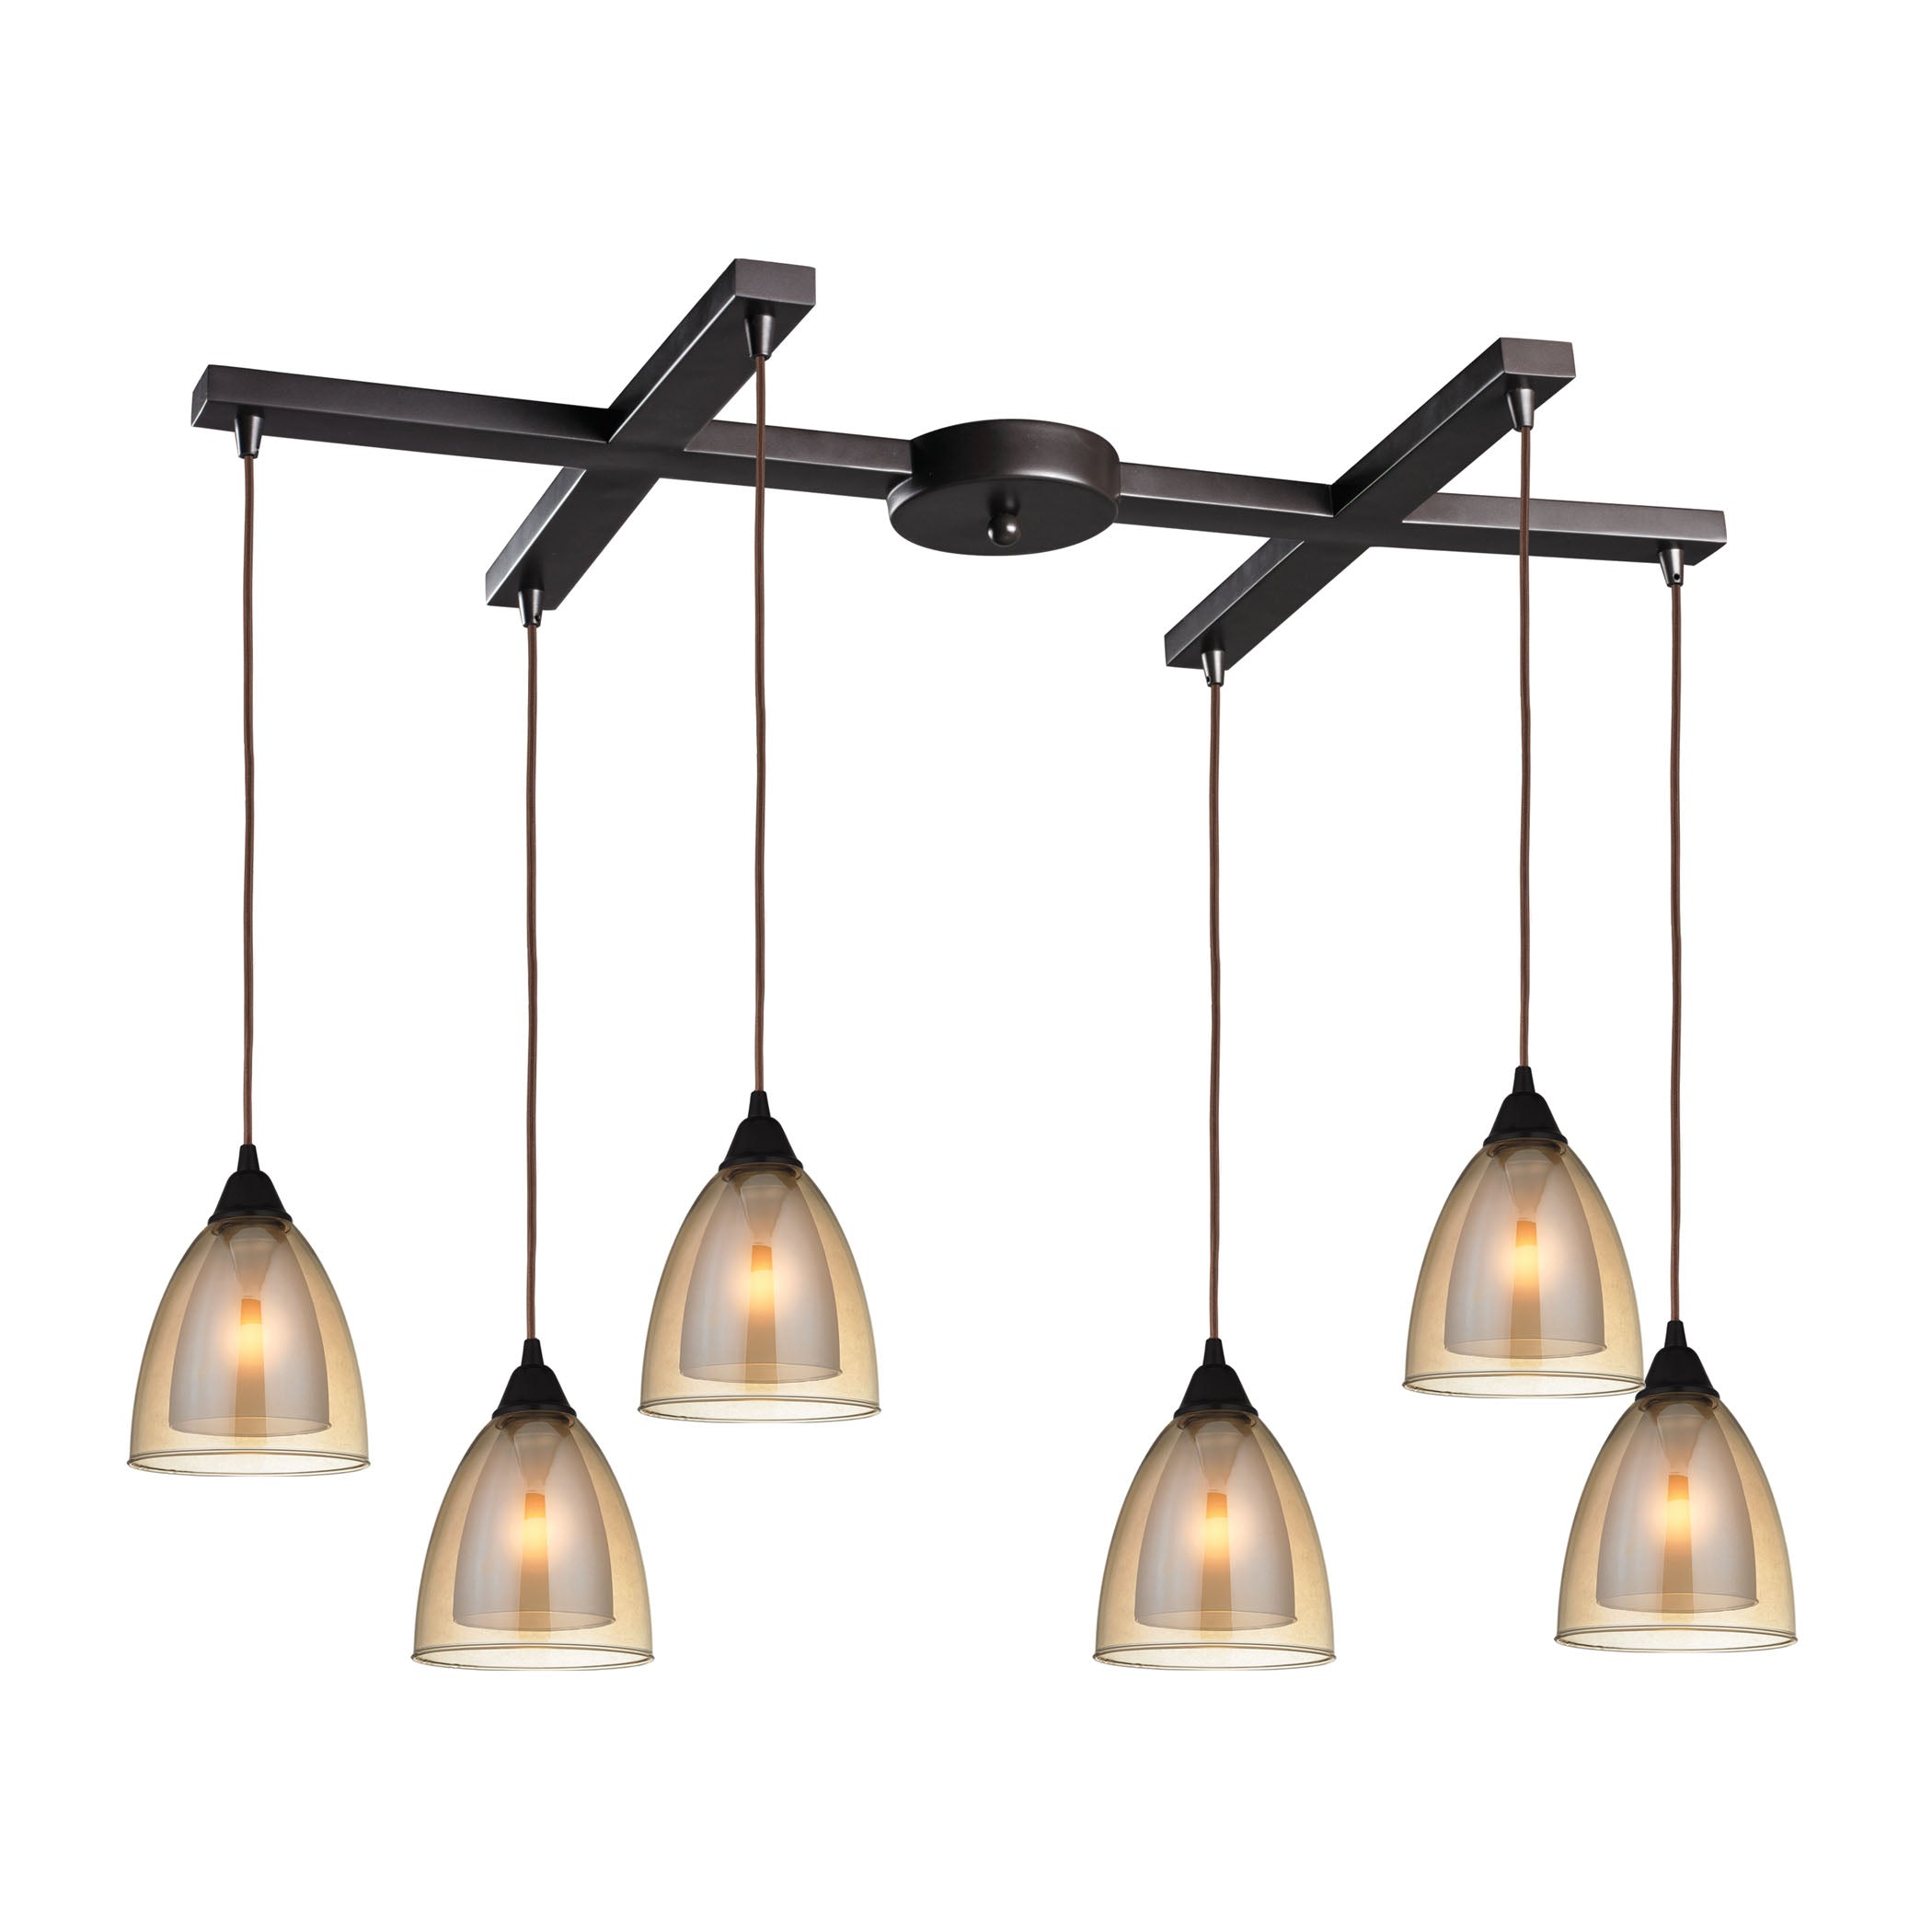 ELK Lighting 10474/6 Layers 6-Light H-Bar Pendant Fixture in Oil Rubbed Bronze with Amber Teak Glass